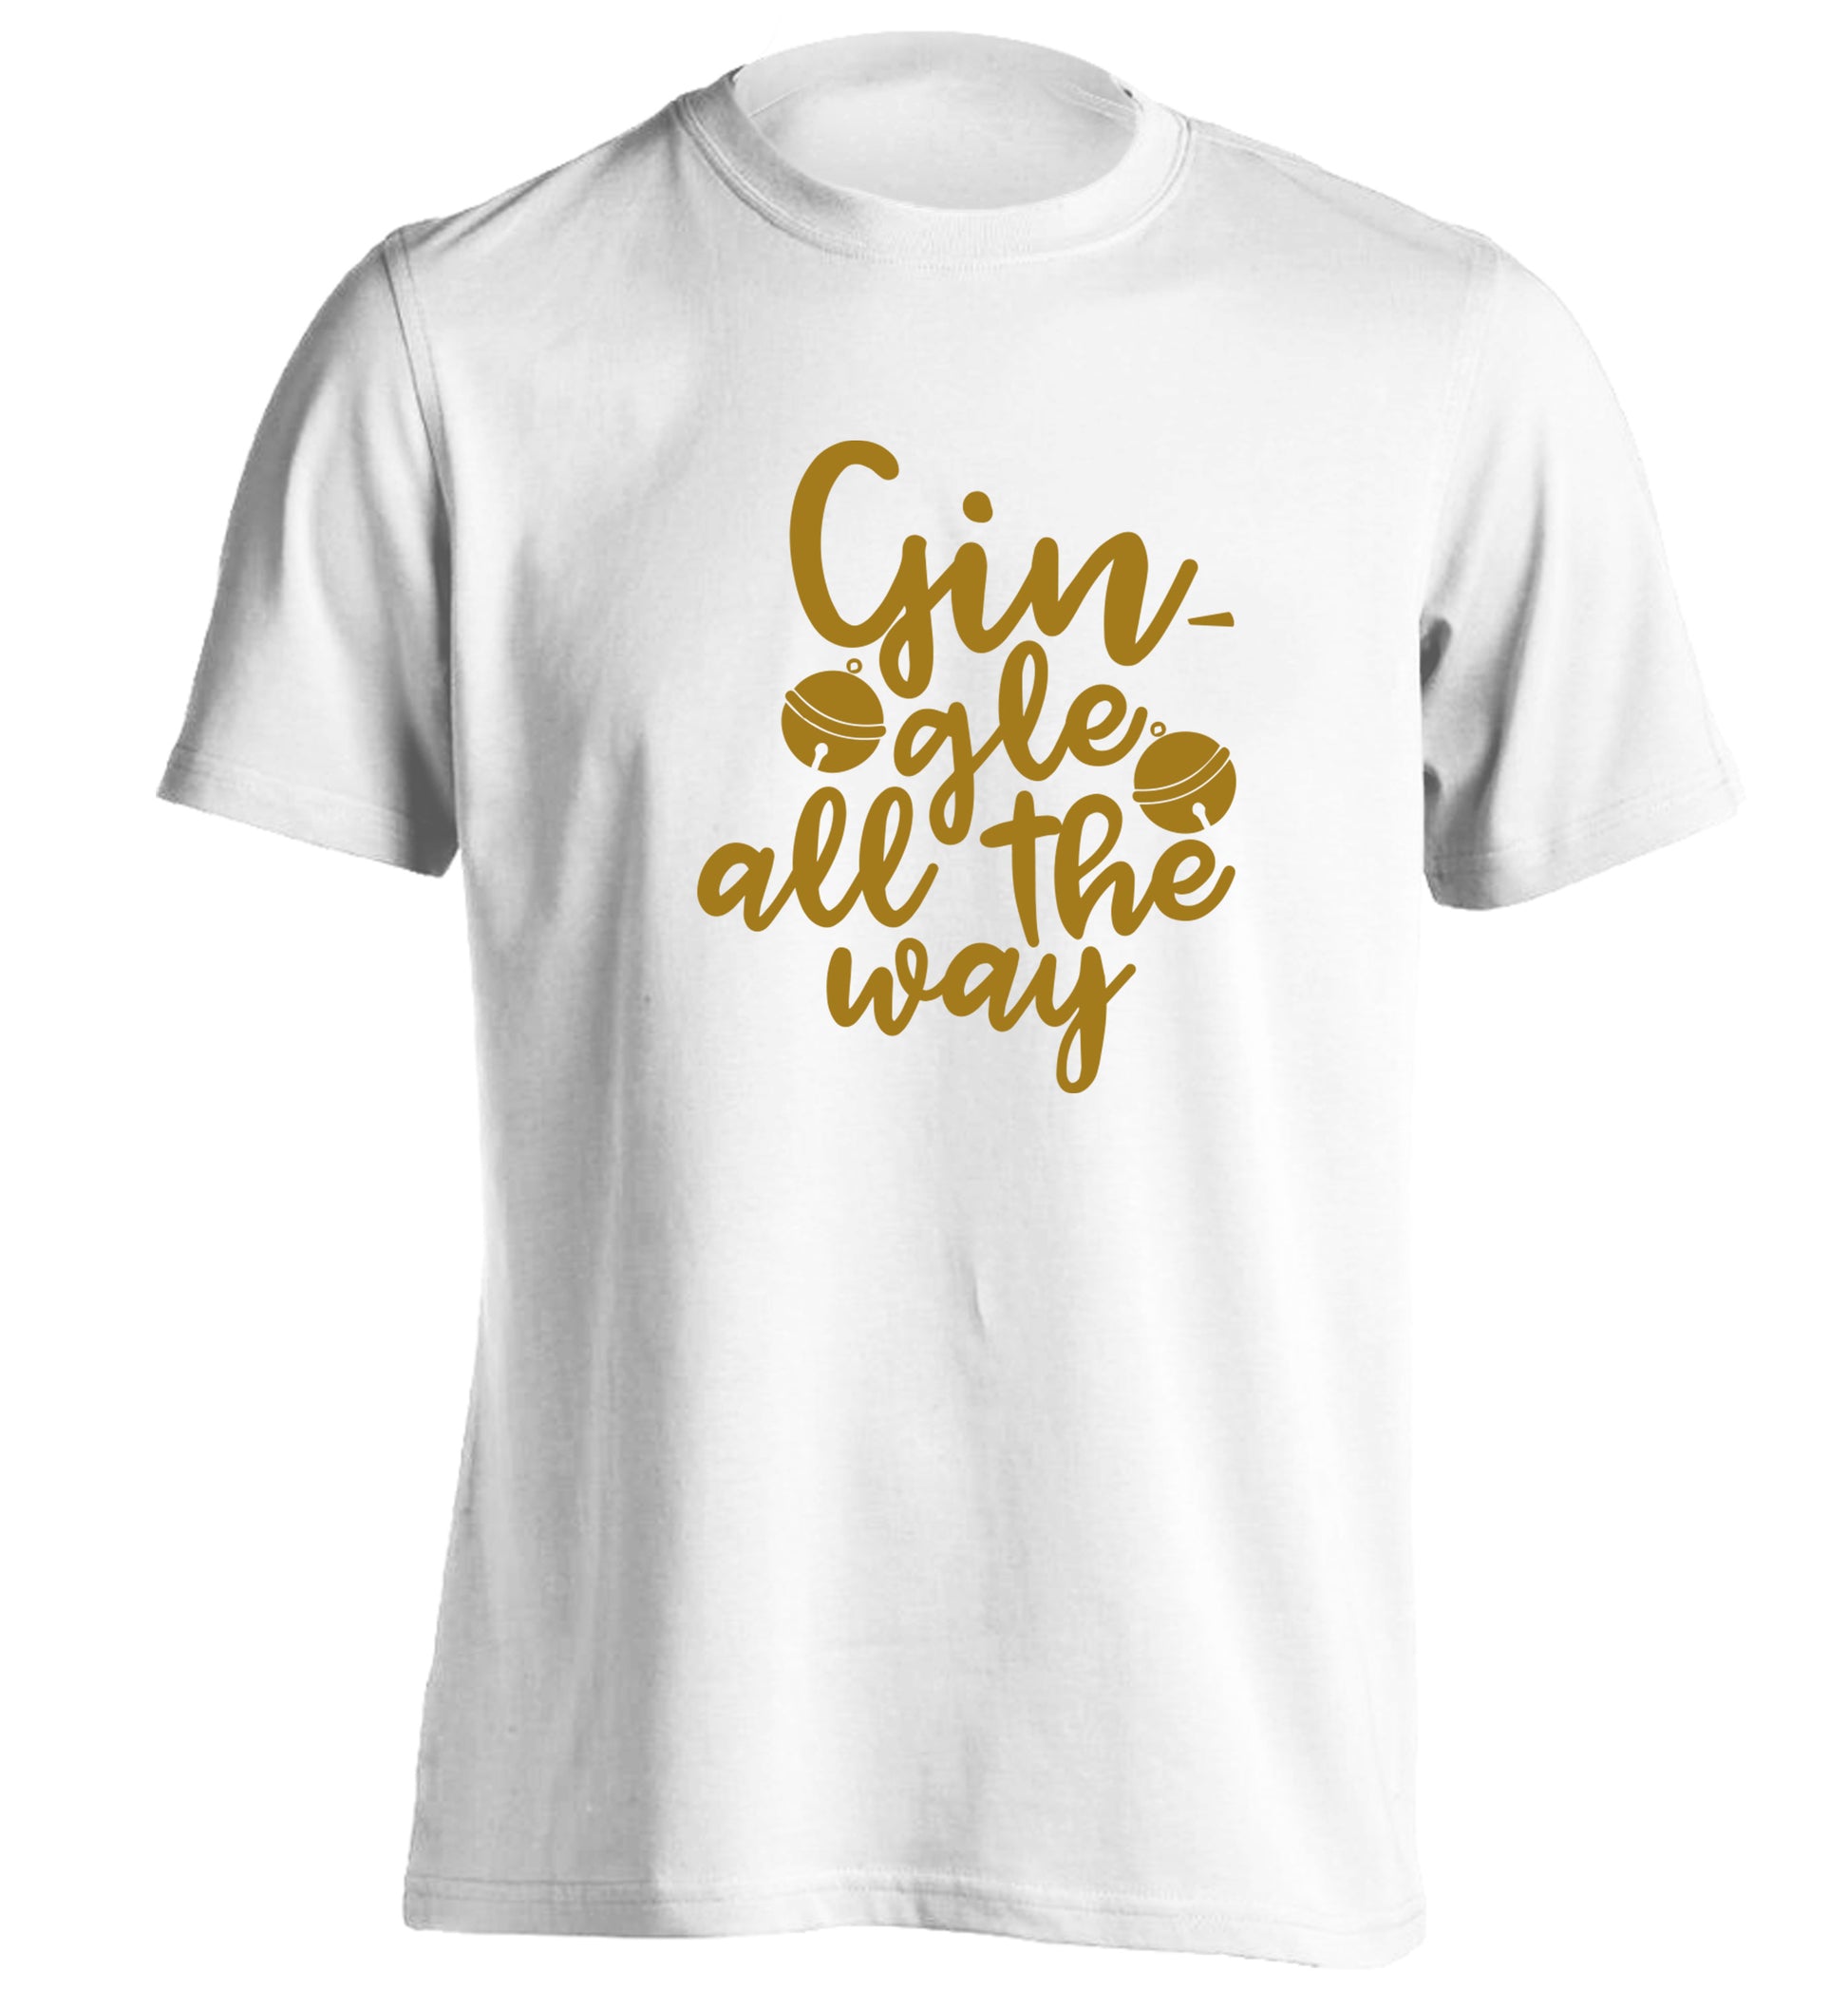 Gin-gle all the way adults unisex white Tshirt 2XL